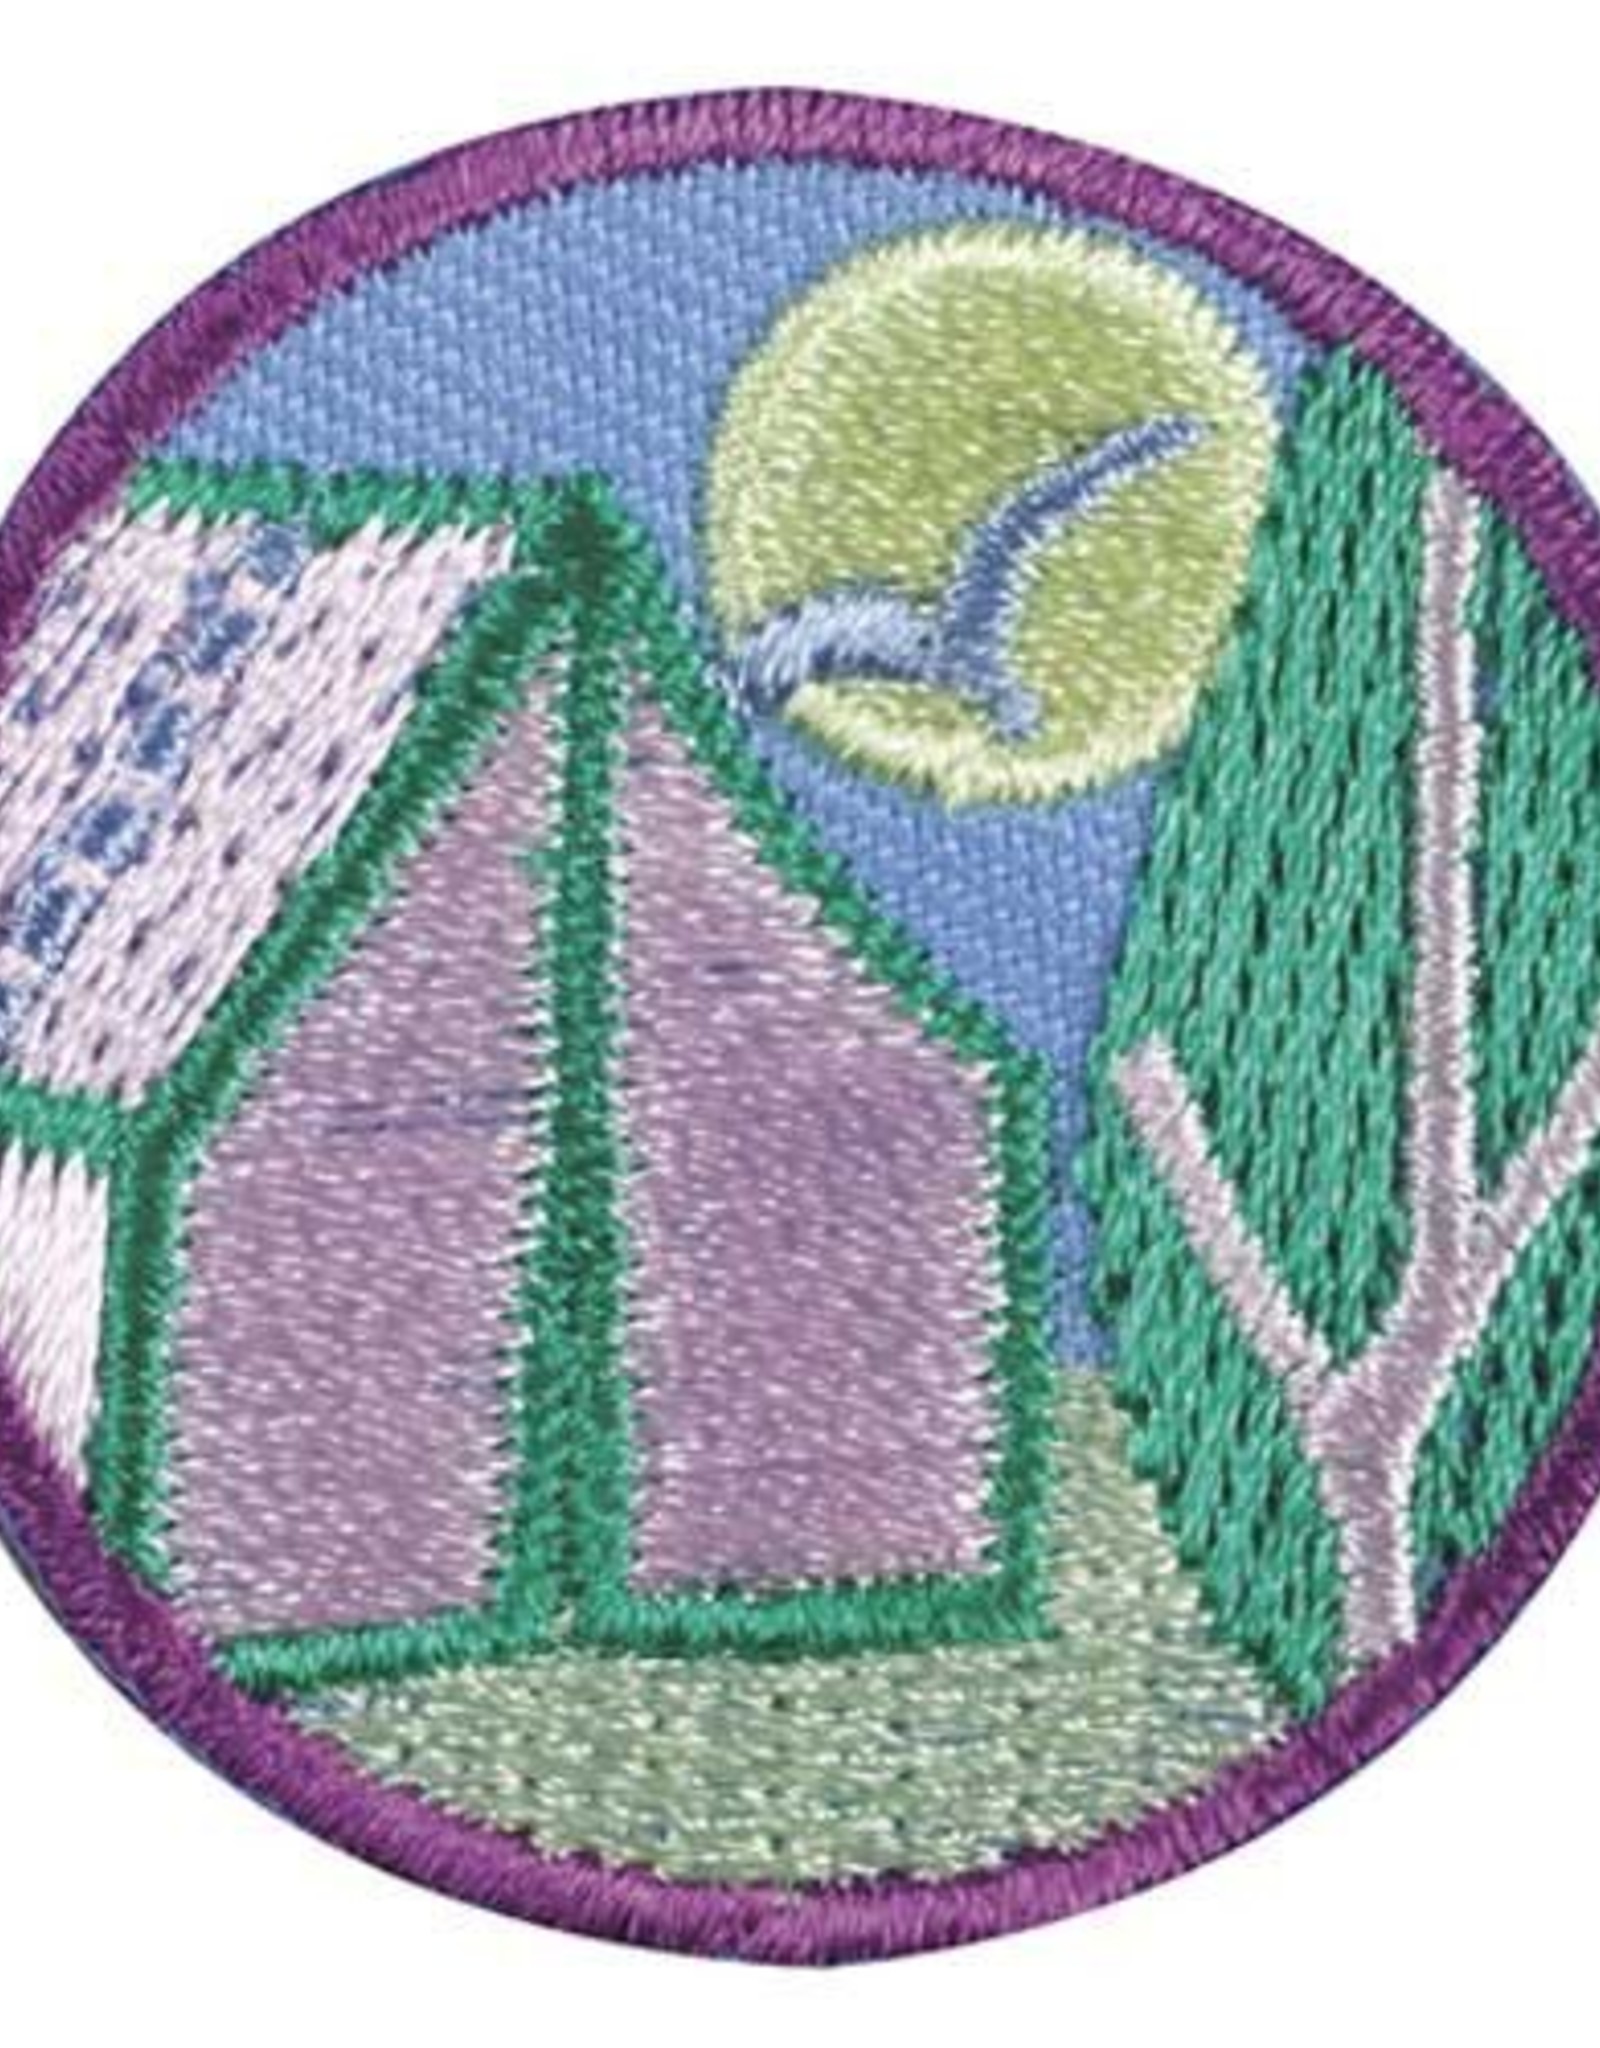 GIRL SCOUTS OF THE USA Junior Camper Badge